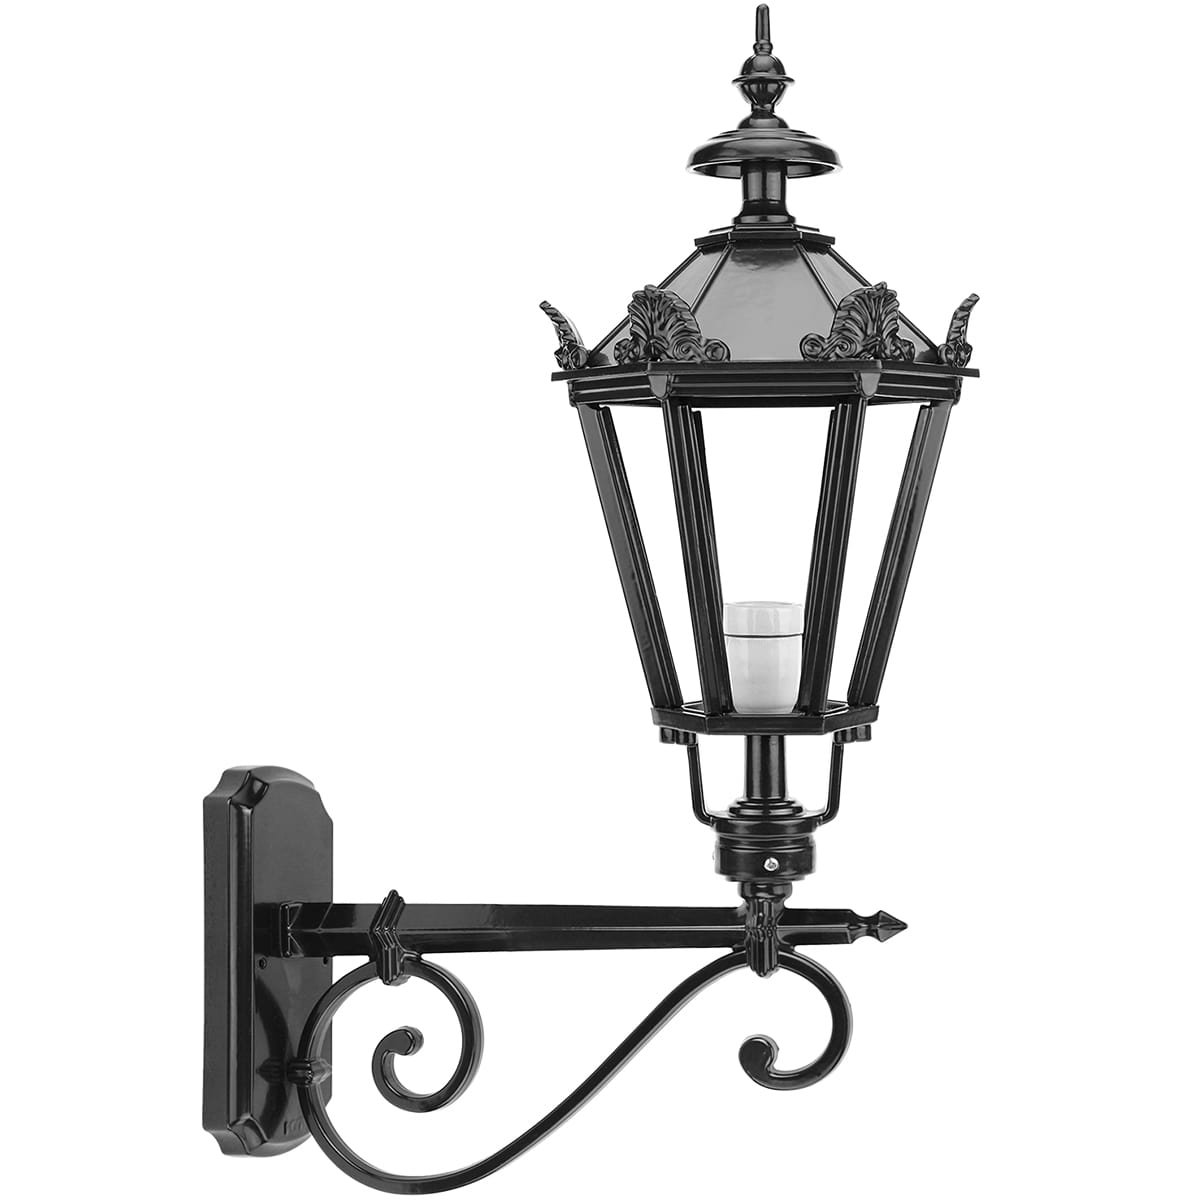 Facade Lamp Reusel with crowns - 83 cm